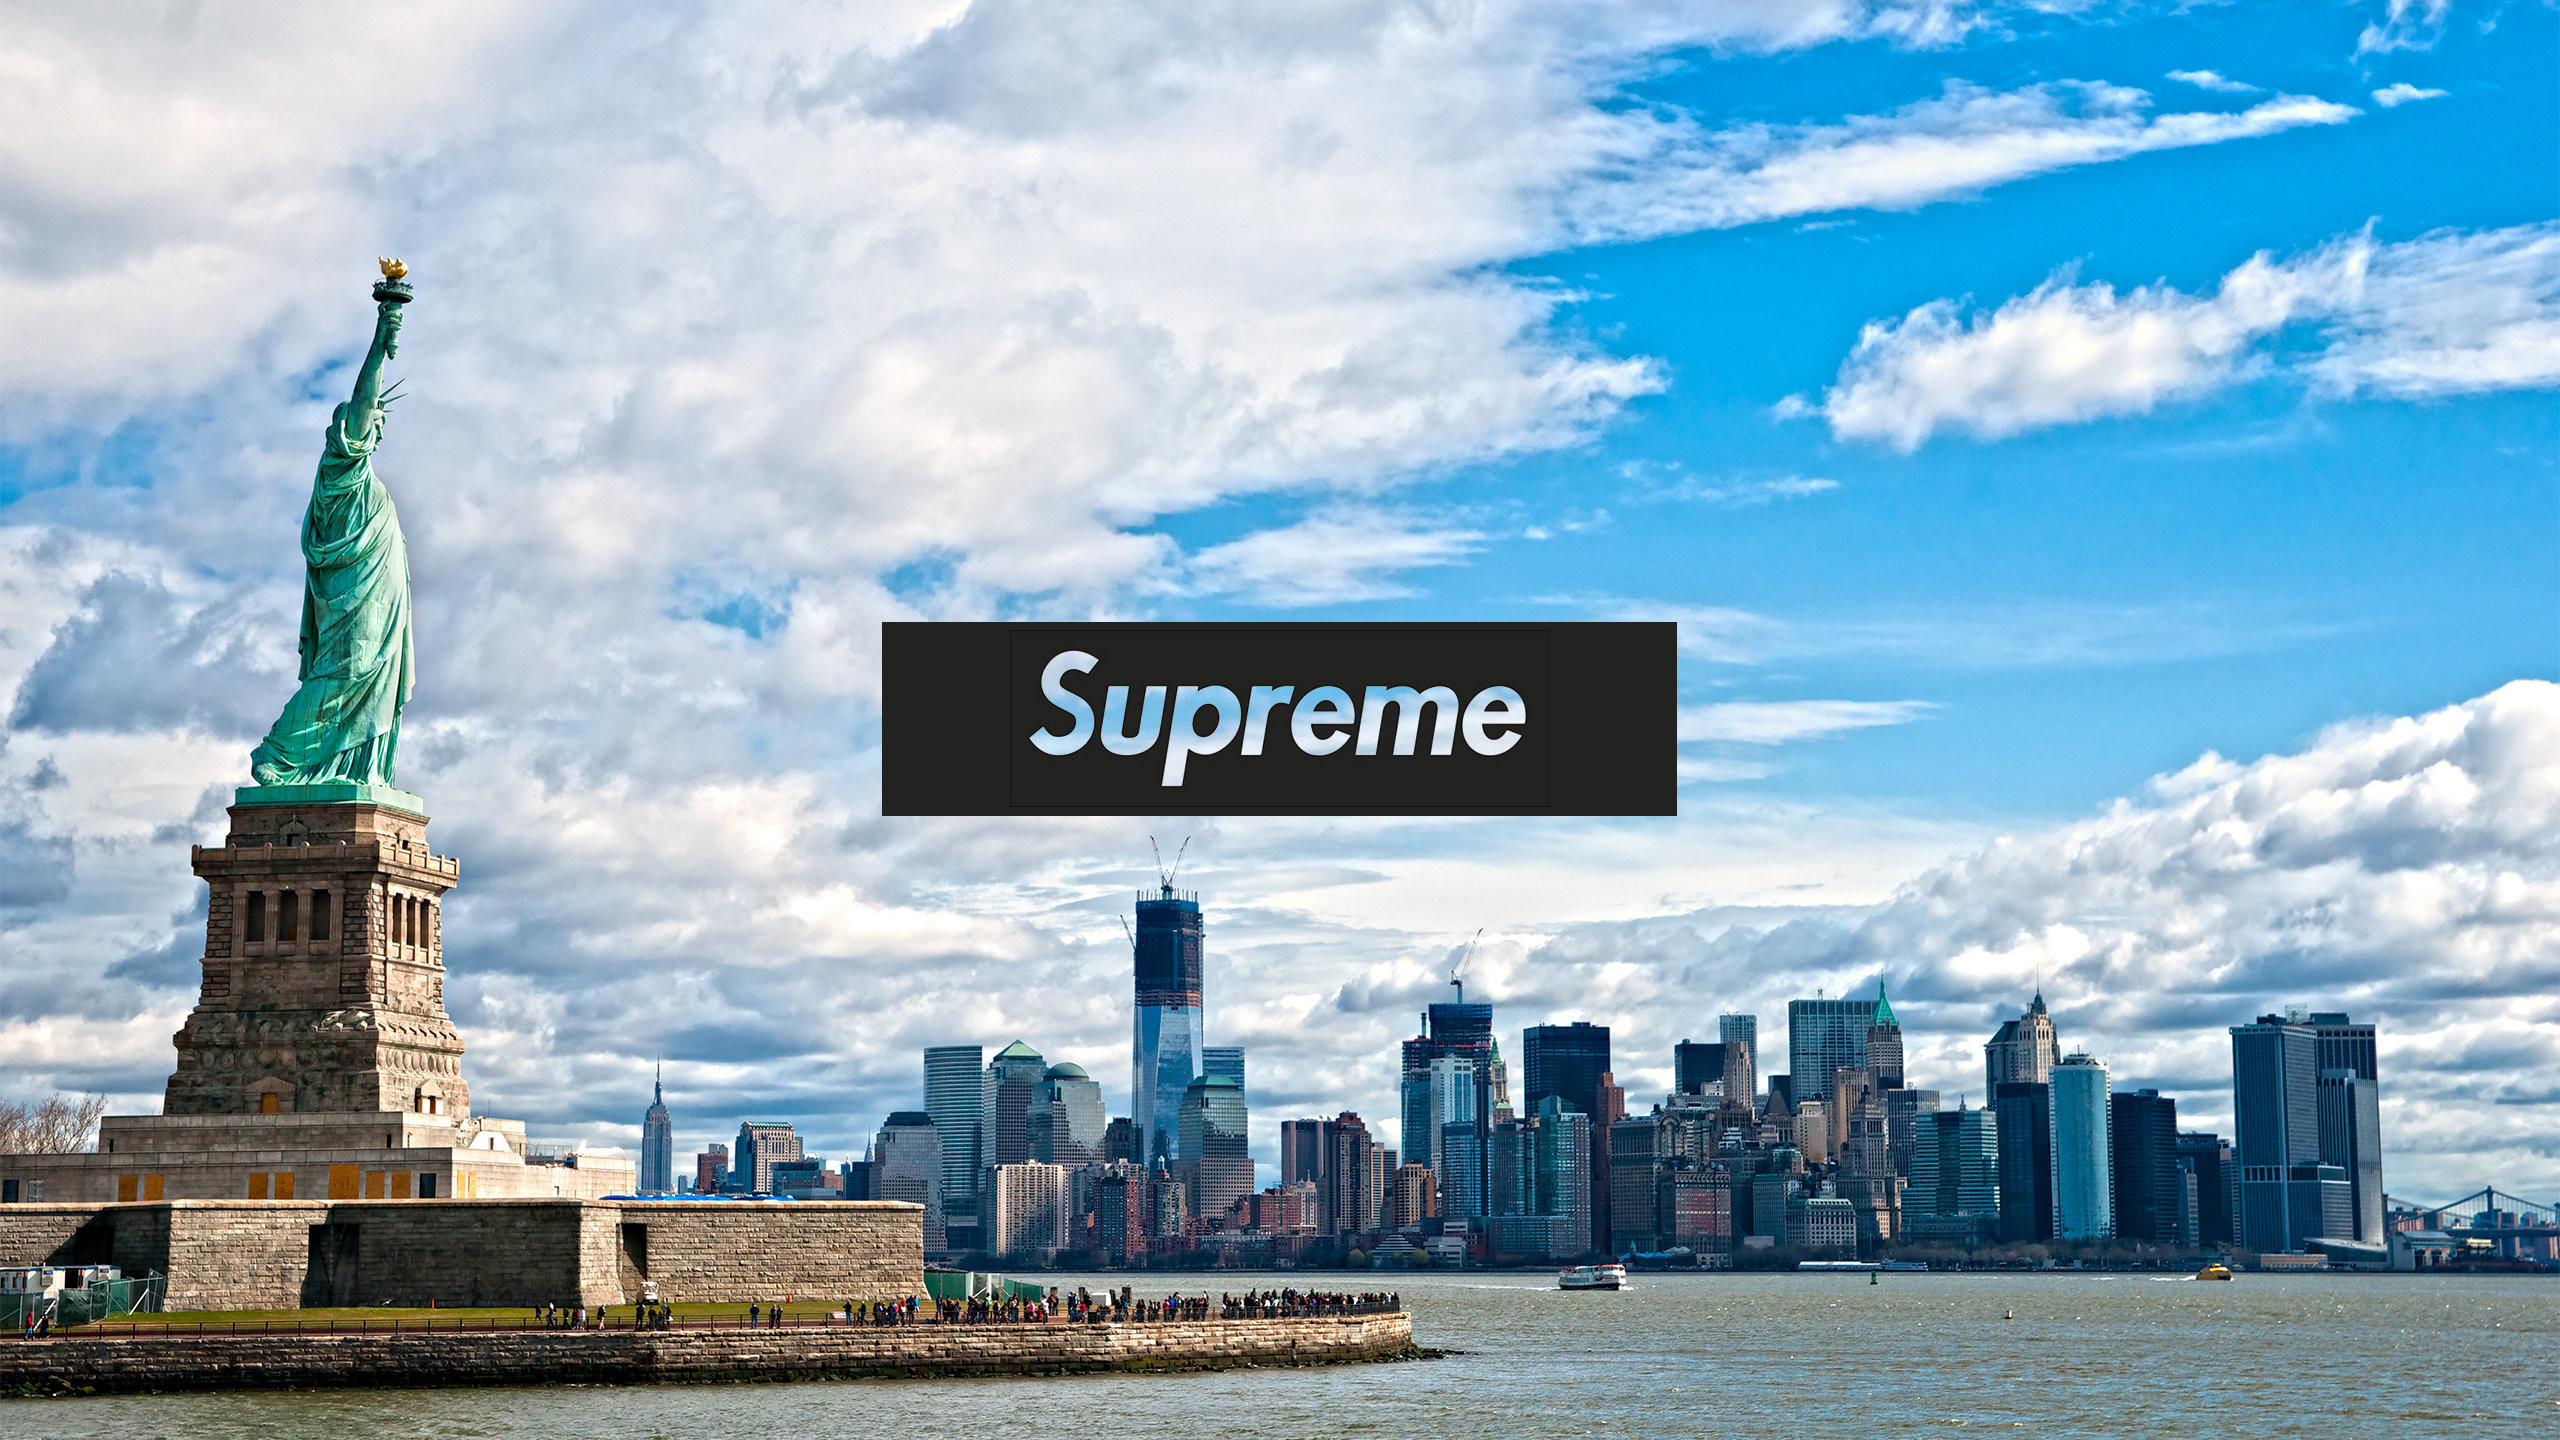 Free Download Supreme Wallpaper 73 Images 2560x1440 For Your Desktop Mobile Tablet Explore 56 Supreme Pc Wallpaper Supreme Pc Wallpaper Supreme Wallpaper Supreme Wallpapers